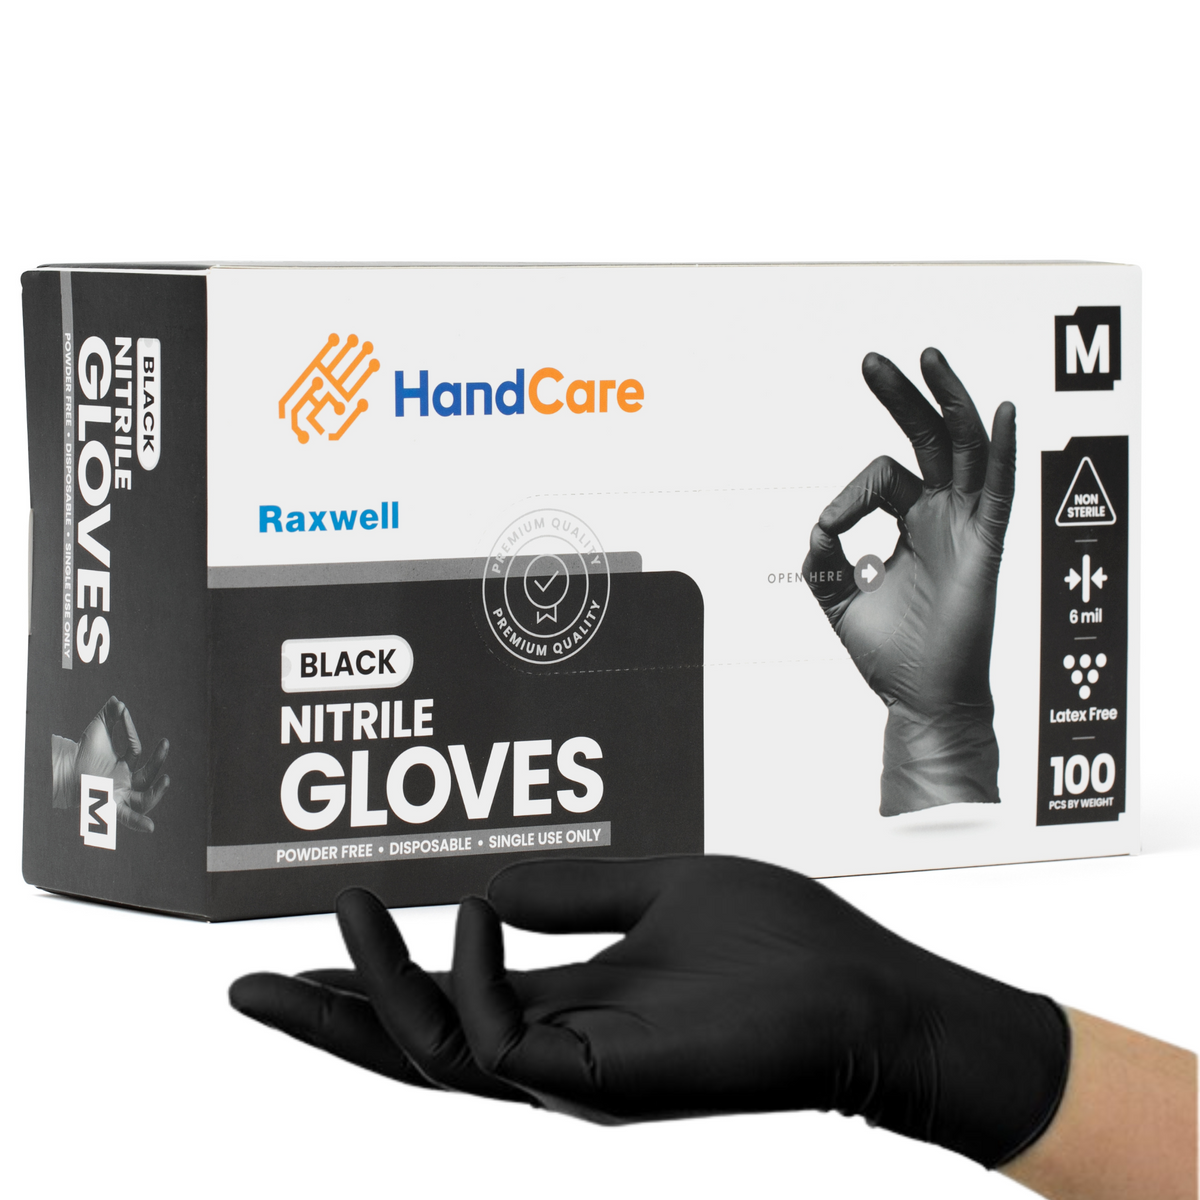 7 Mil Heavy Duty Latex Gloves (Pack of 100)